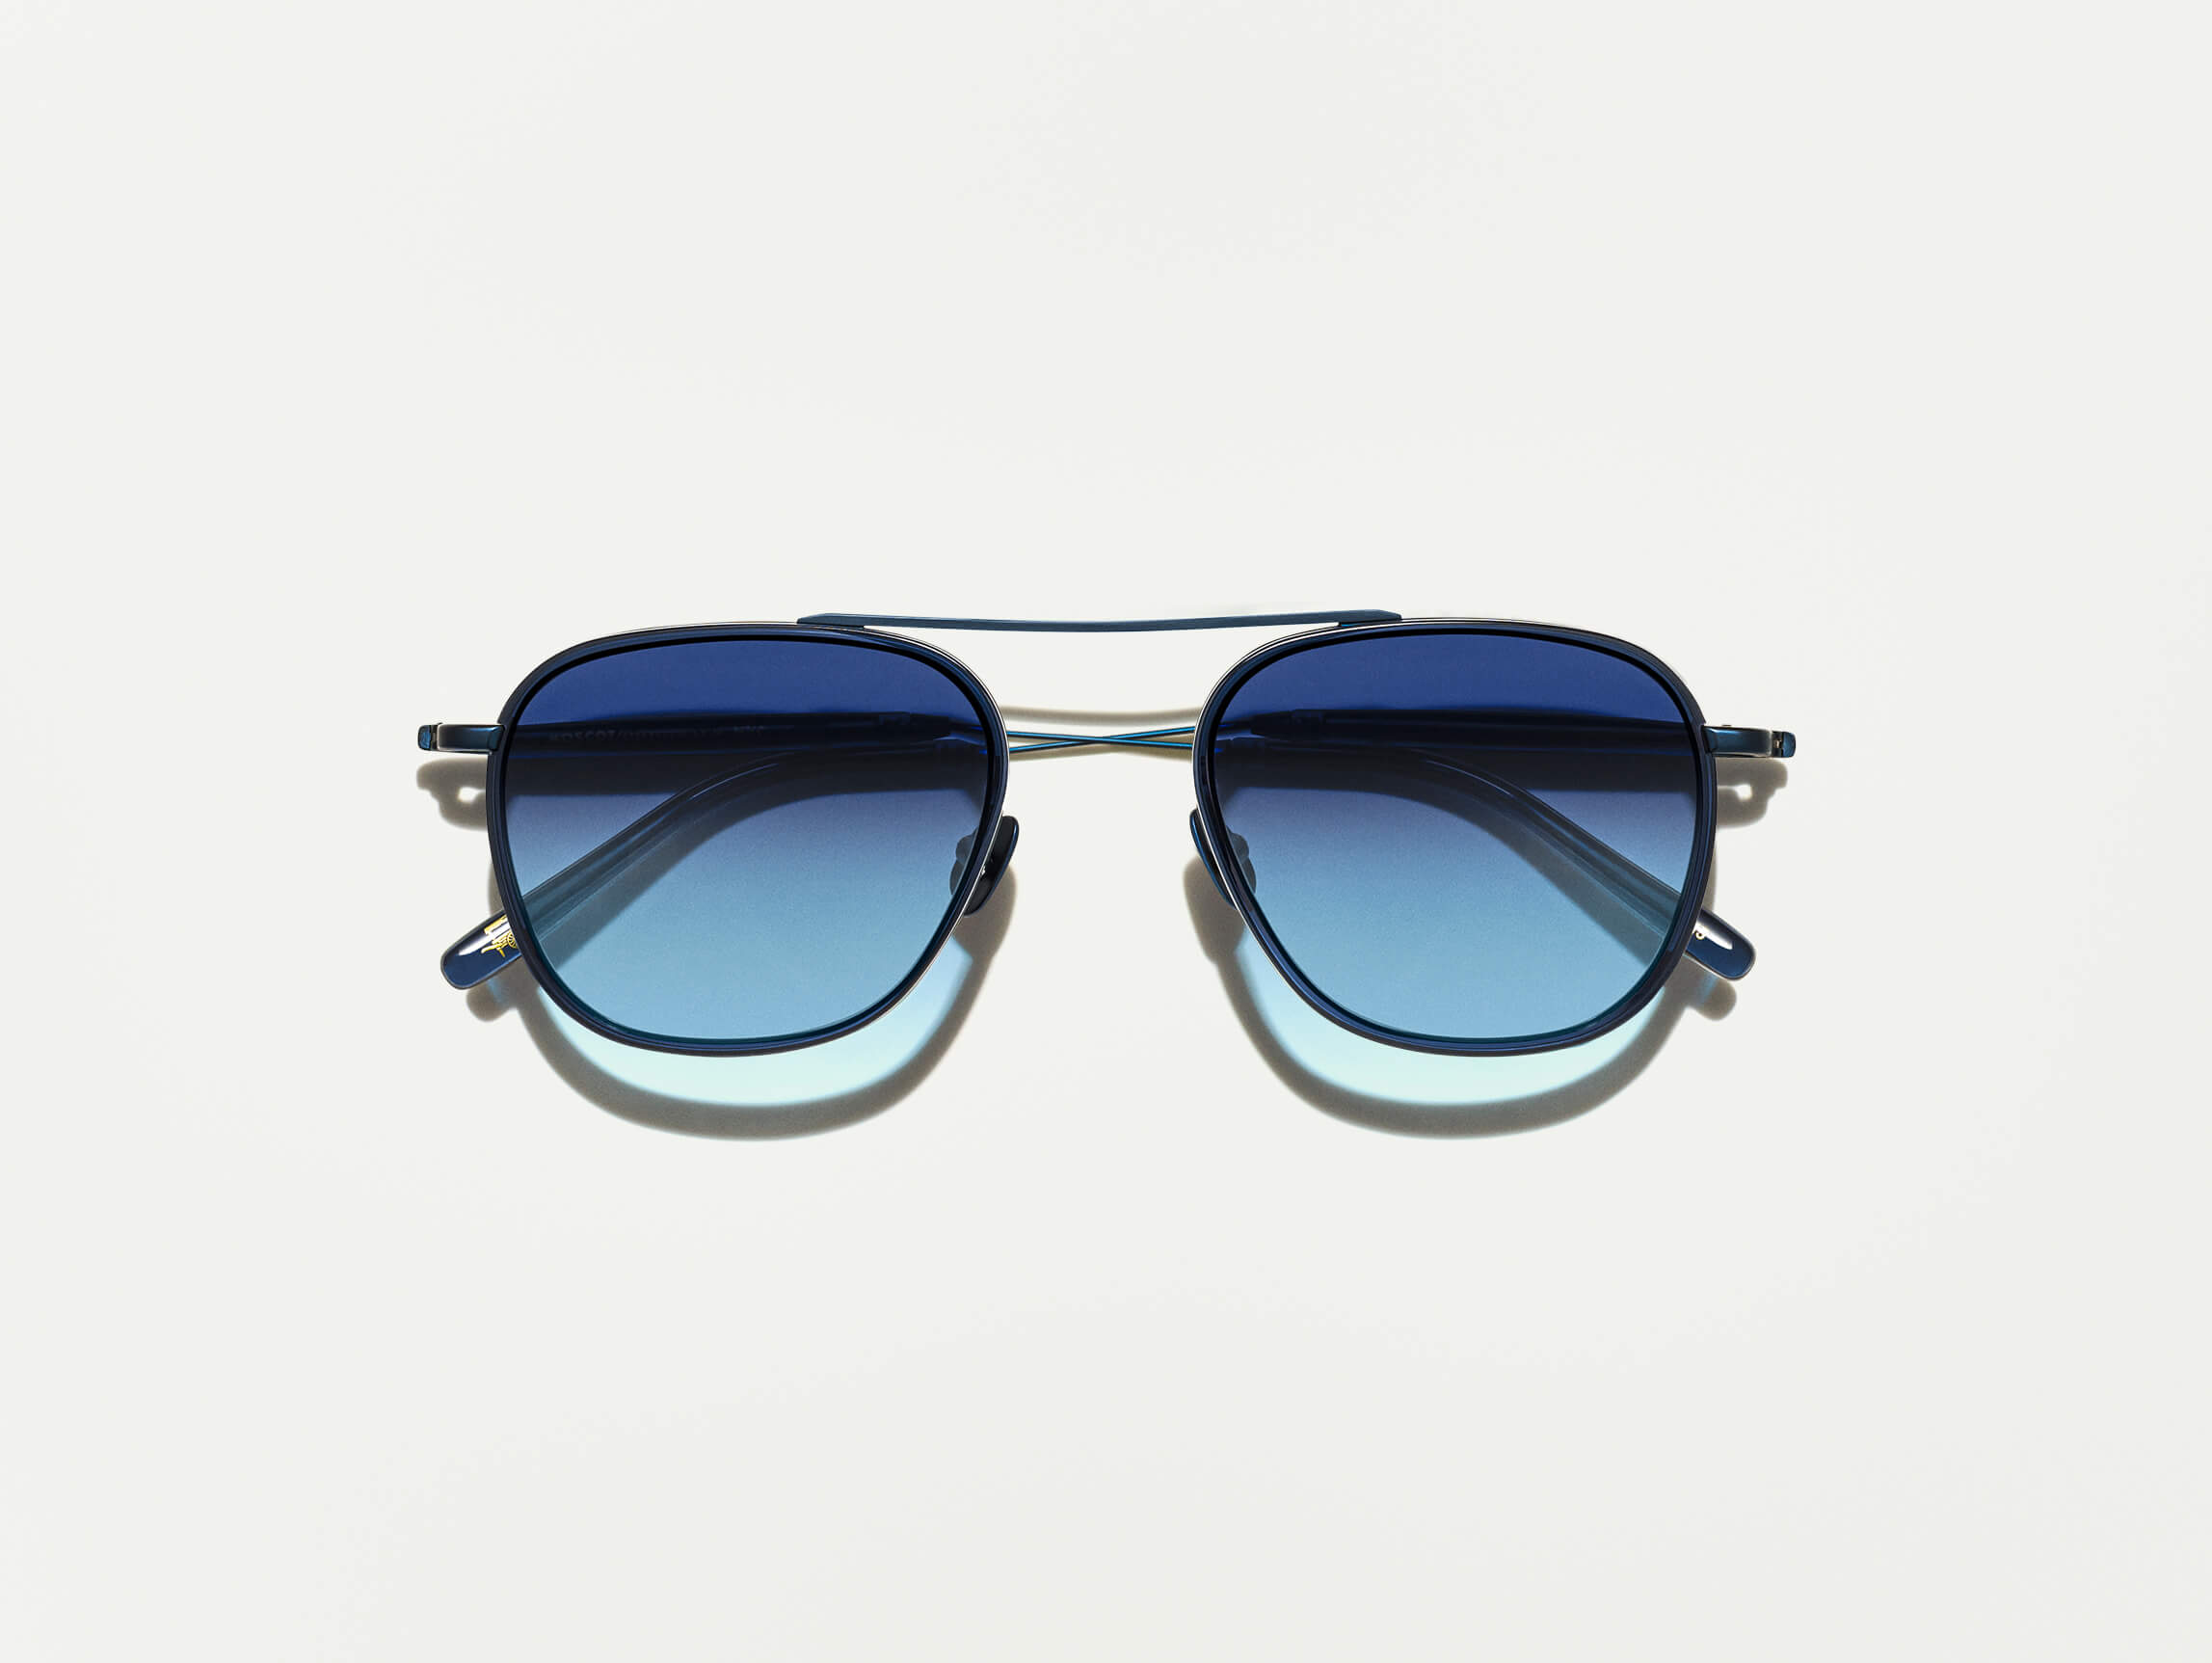 The FANAGLE SUN in Navy with Denim Blue Tinted Lenses